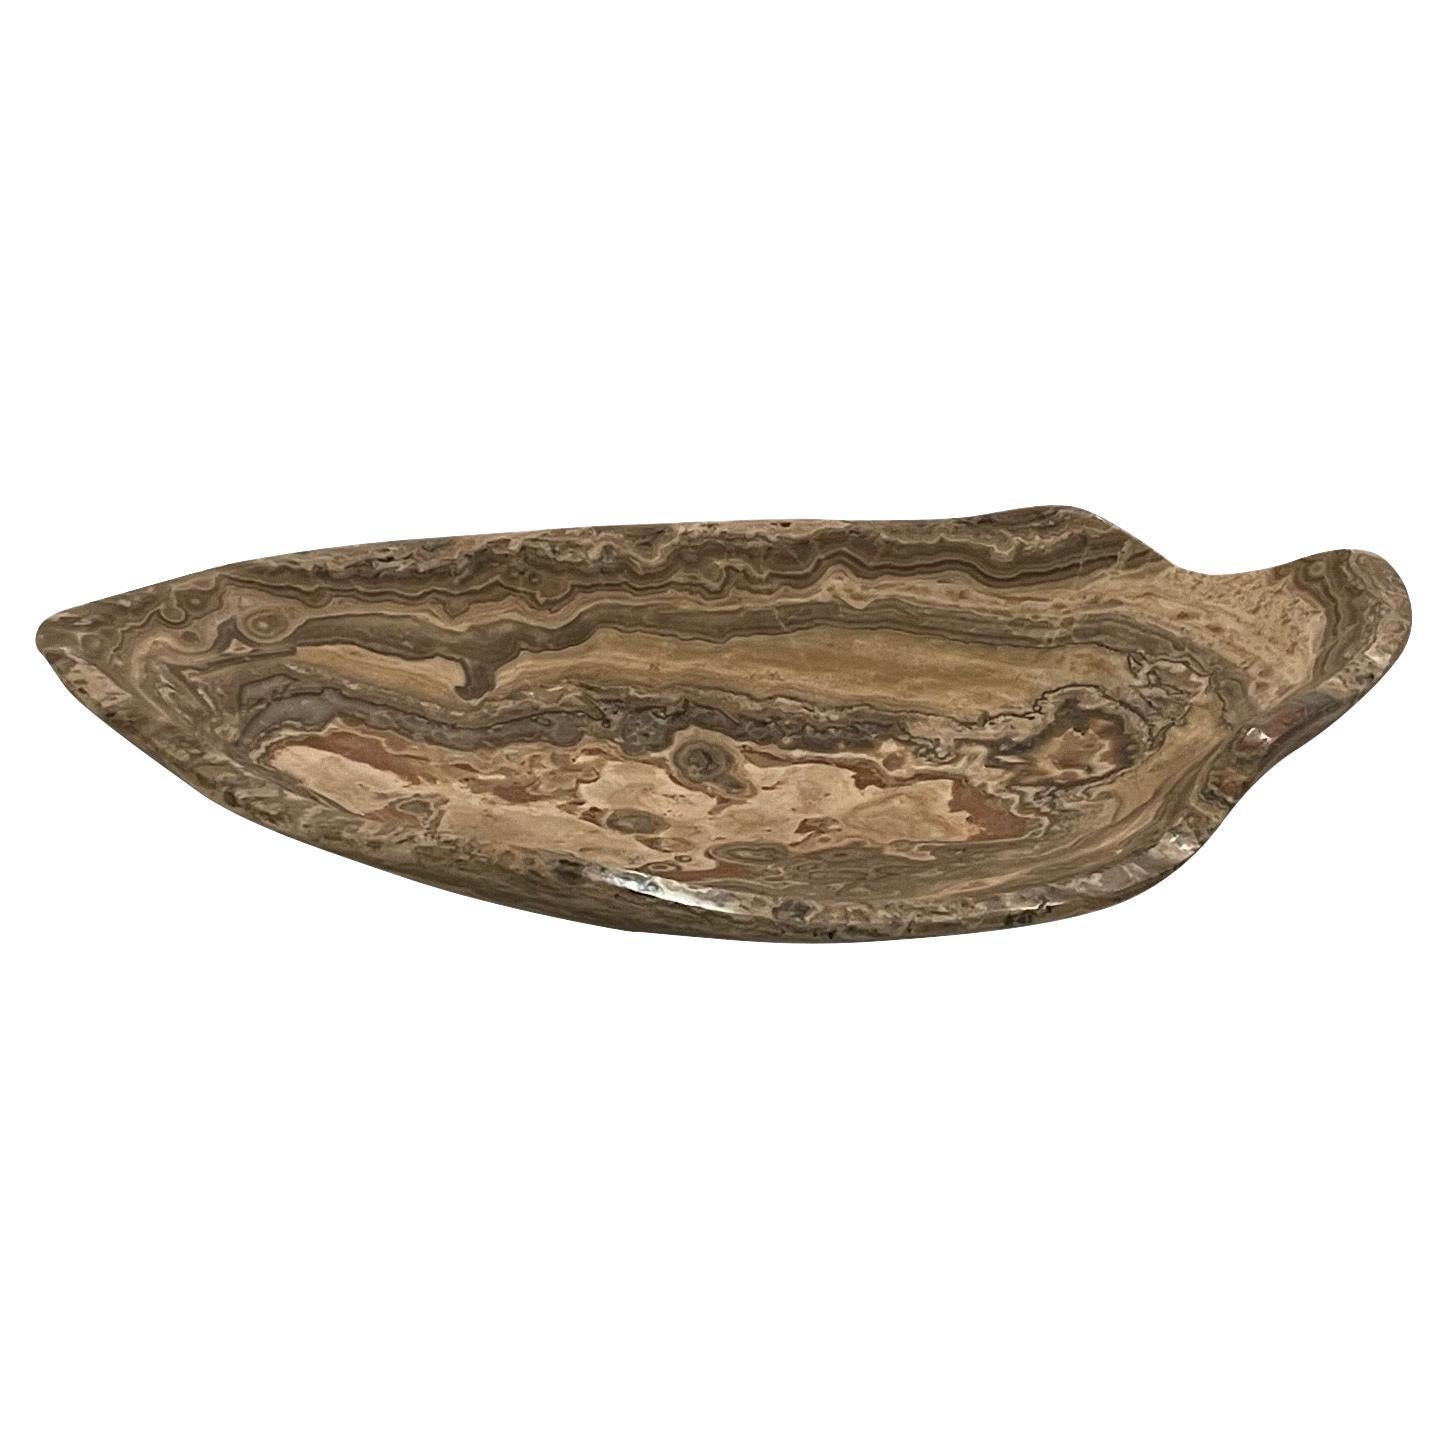 Beige, Grey And Cream Free Form Onyx Bowl, Morocco, Contemporary For Sale